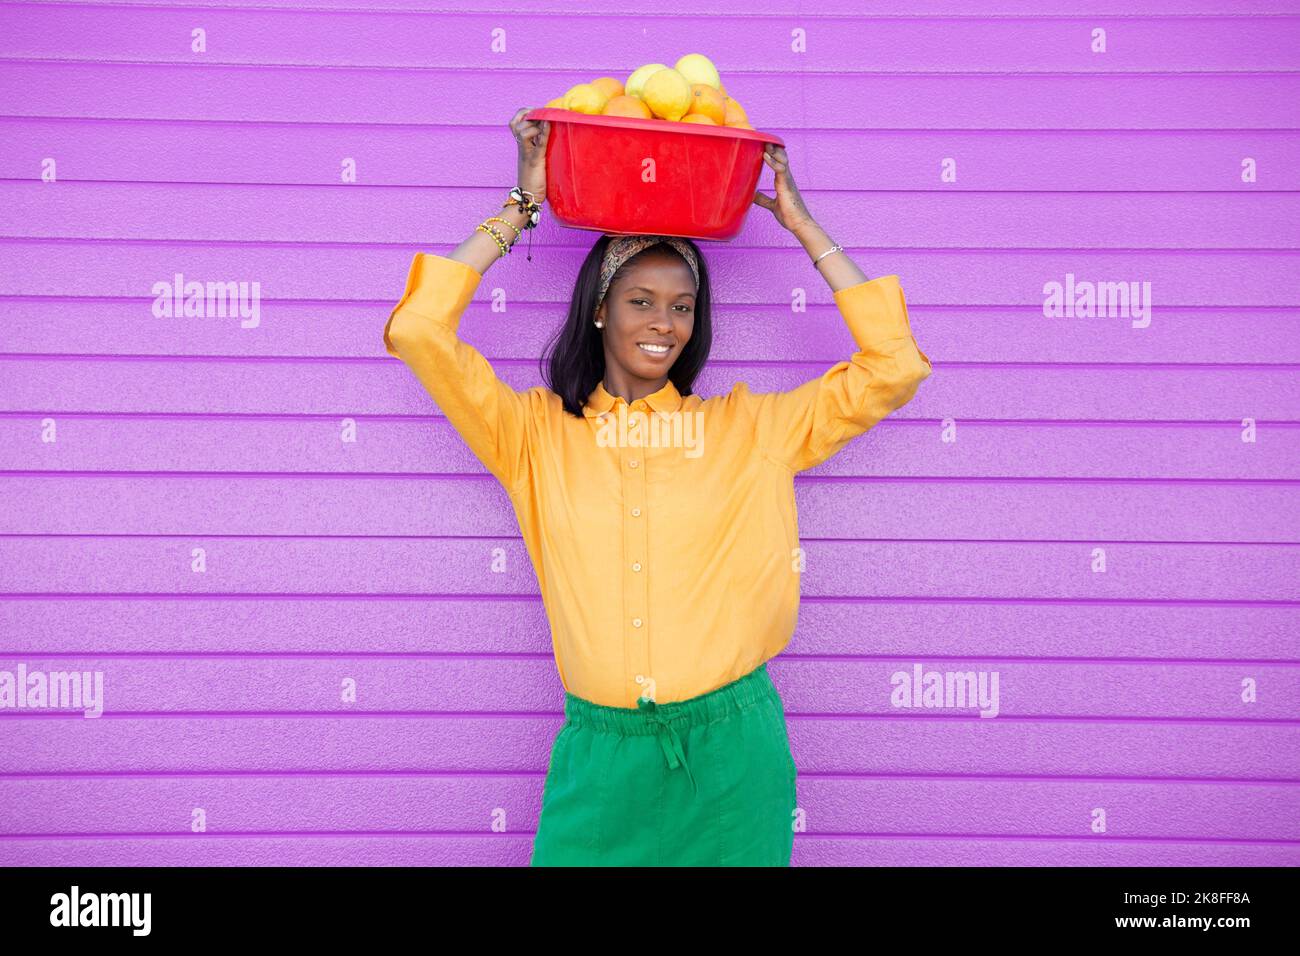 Young woman carrying basket full of oranges on head in front of purple wall Stock Photo